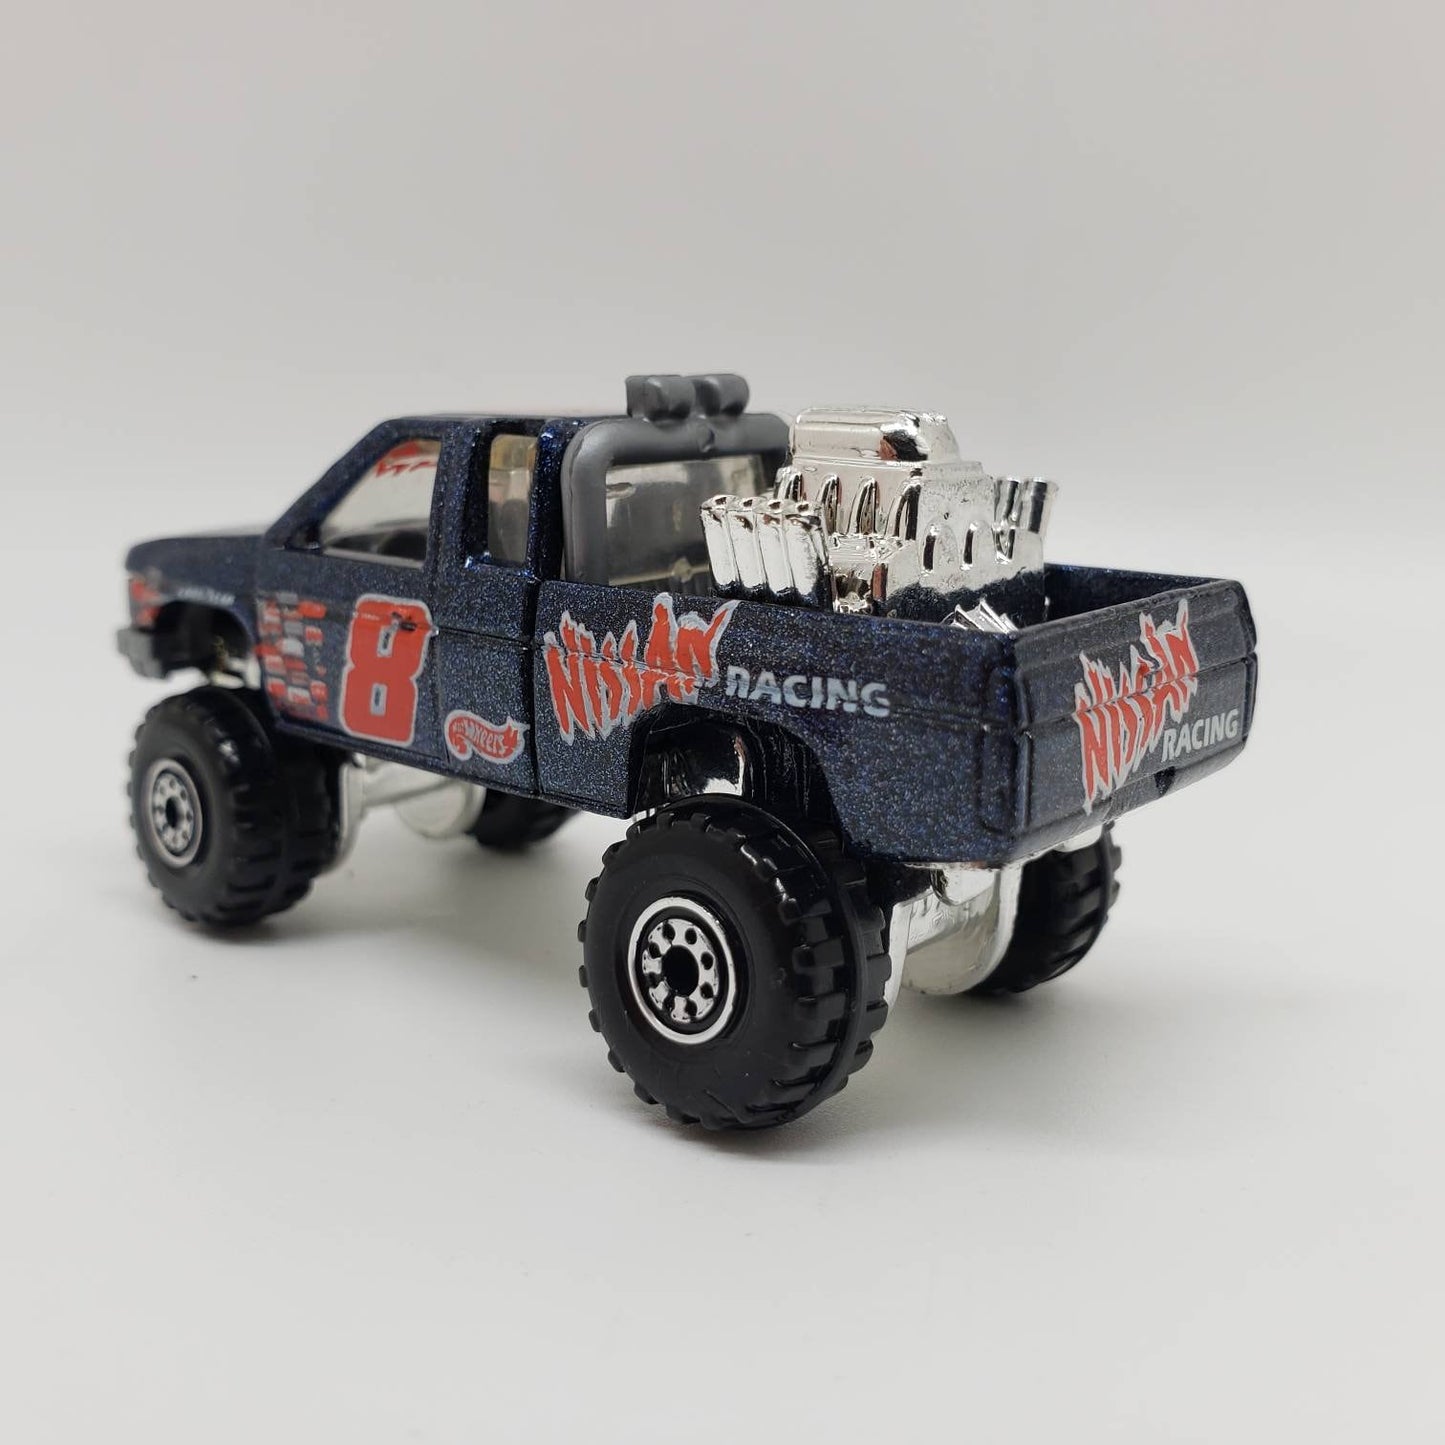 Hot Wheels Nissan Hardbody Truck Metalflake Blue Race Truck Perfect Birthday Gift Miniature Collectable Scale Model Toy Car